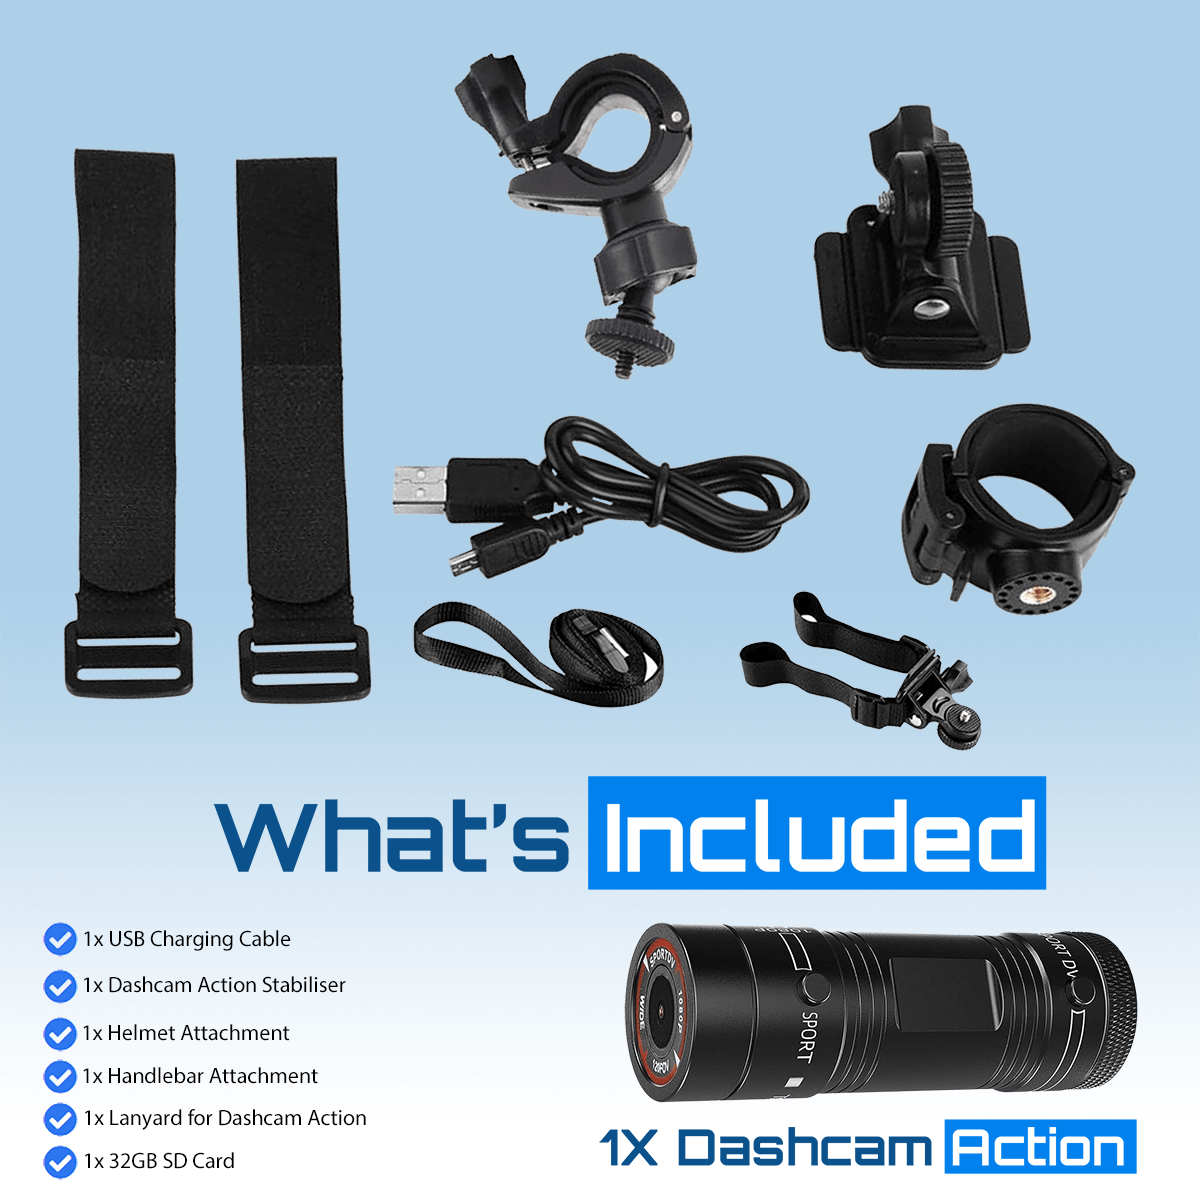 Dashcam Action (For Cyclists & Motorbikes) WIRELESS